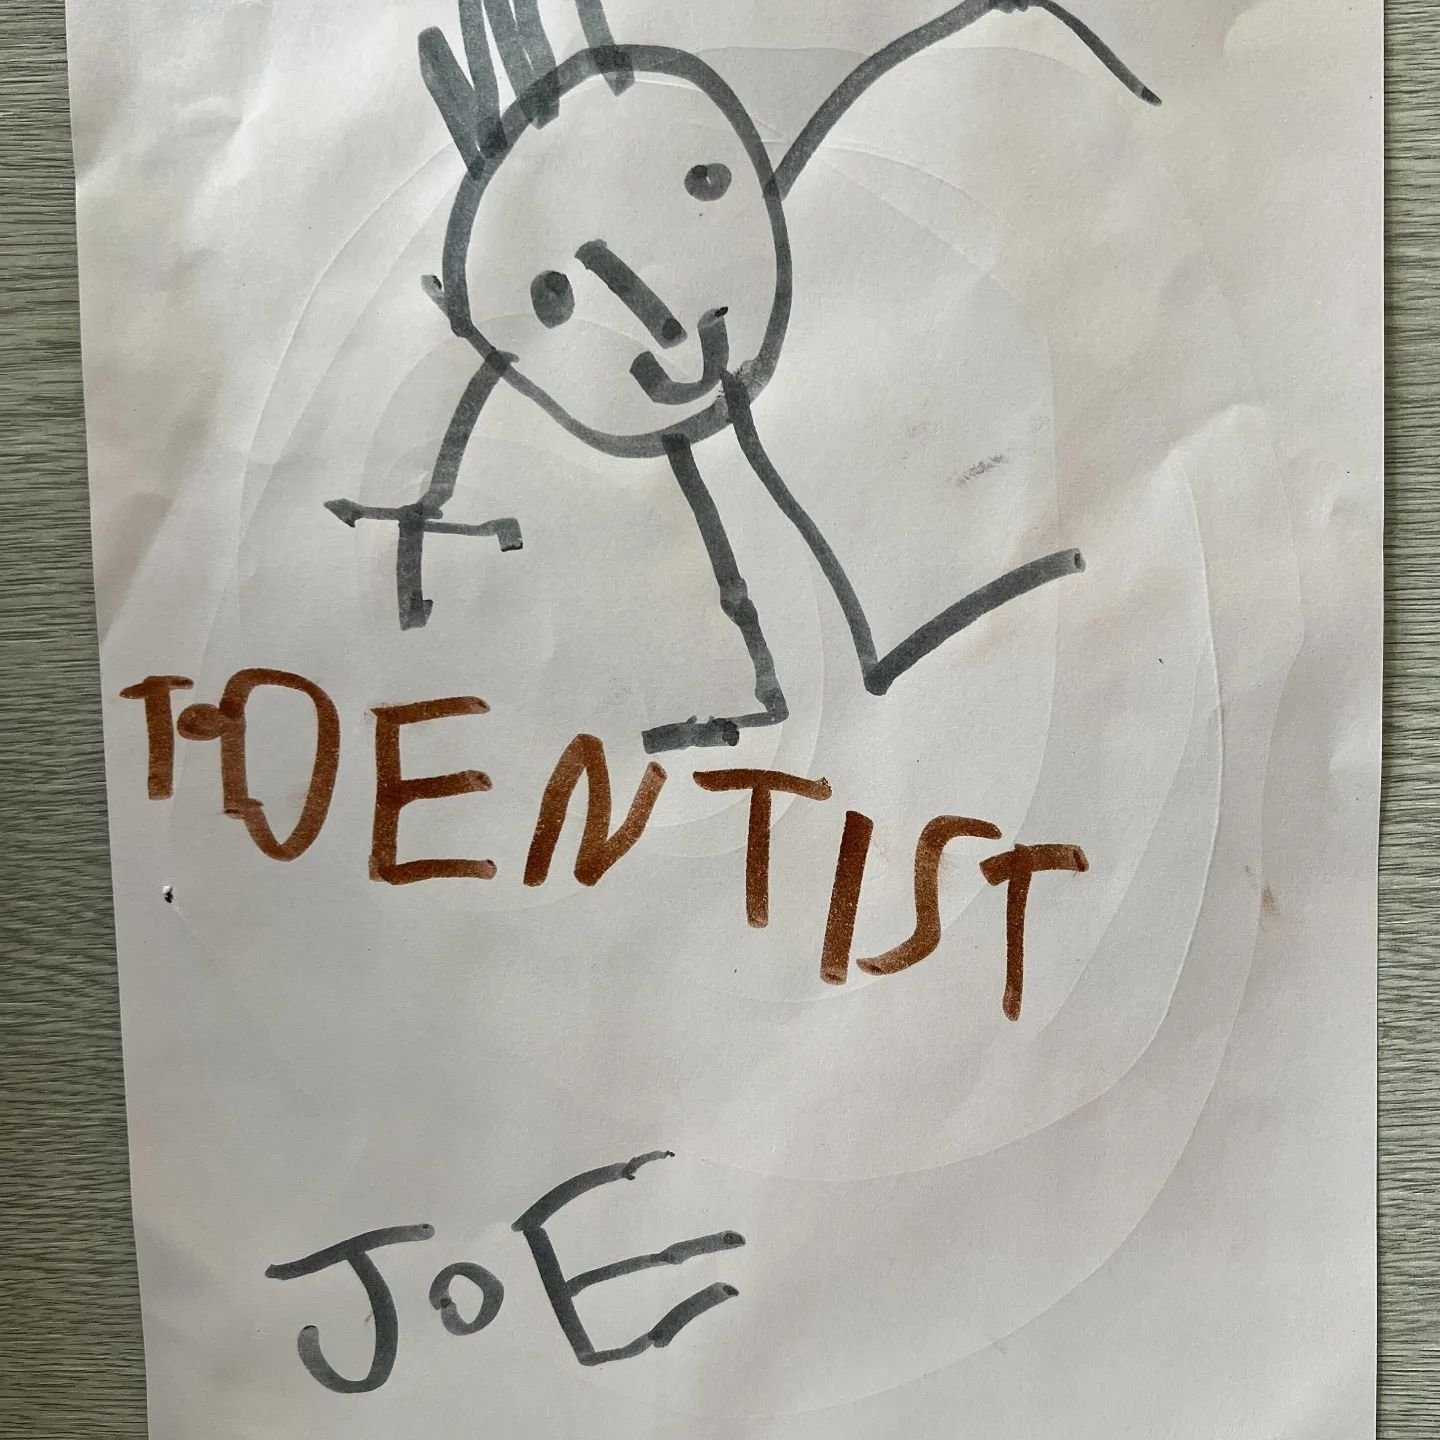 🎨✨ Just received this adorable artwork from 4-year-old Joe during his dental visit! 🦷😊 Many of you have pointed out the striking resemblance it bears to yours truly! Thank you, Joe, for this lovely gift &ndash; it's made our day! #DentistLife #Kid